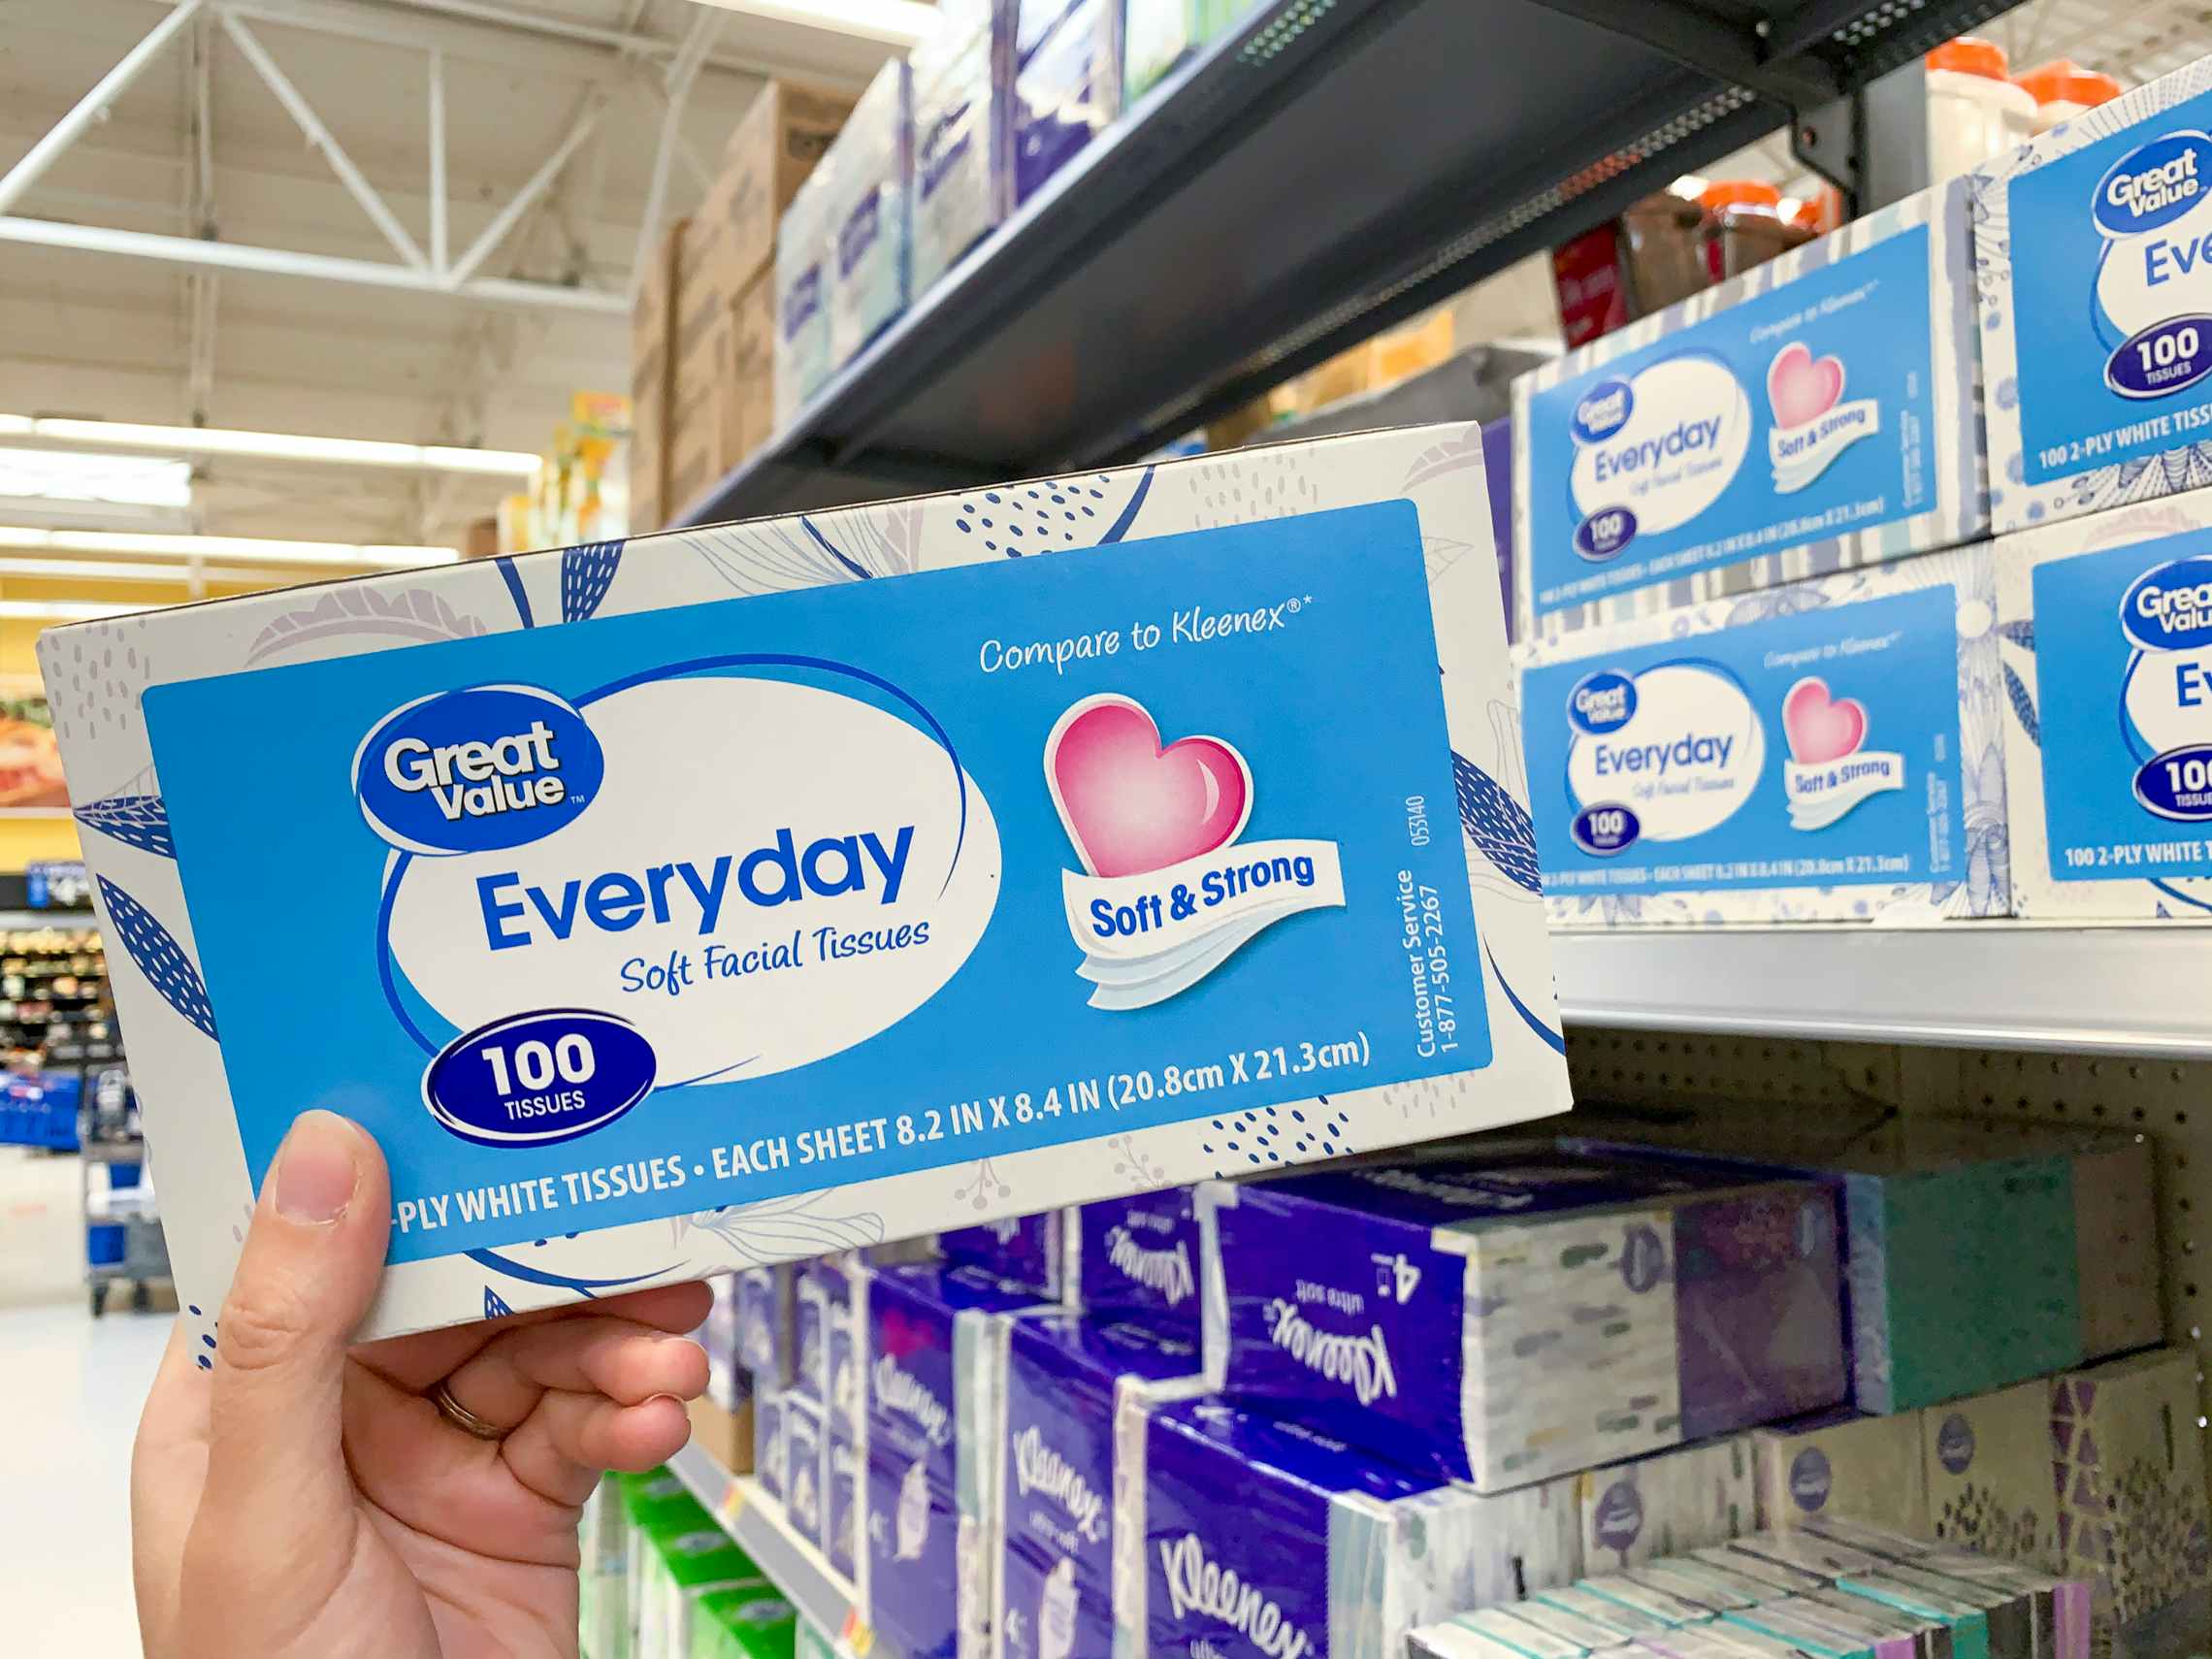 Everyday Great Value Facial Tissue boxes inside Walmart.